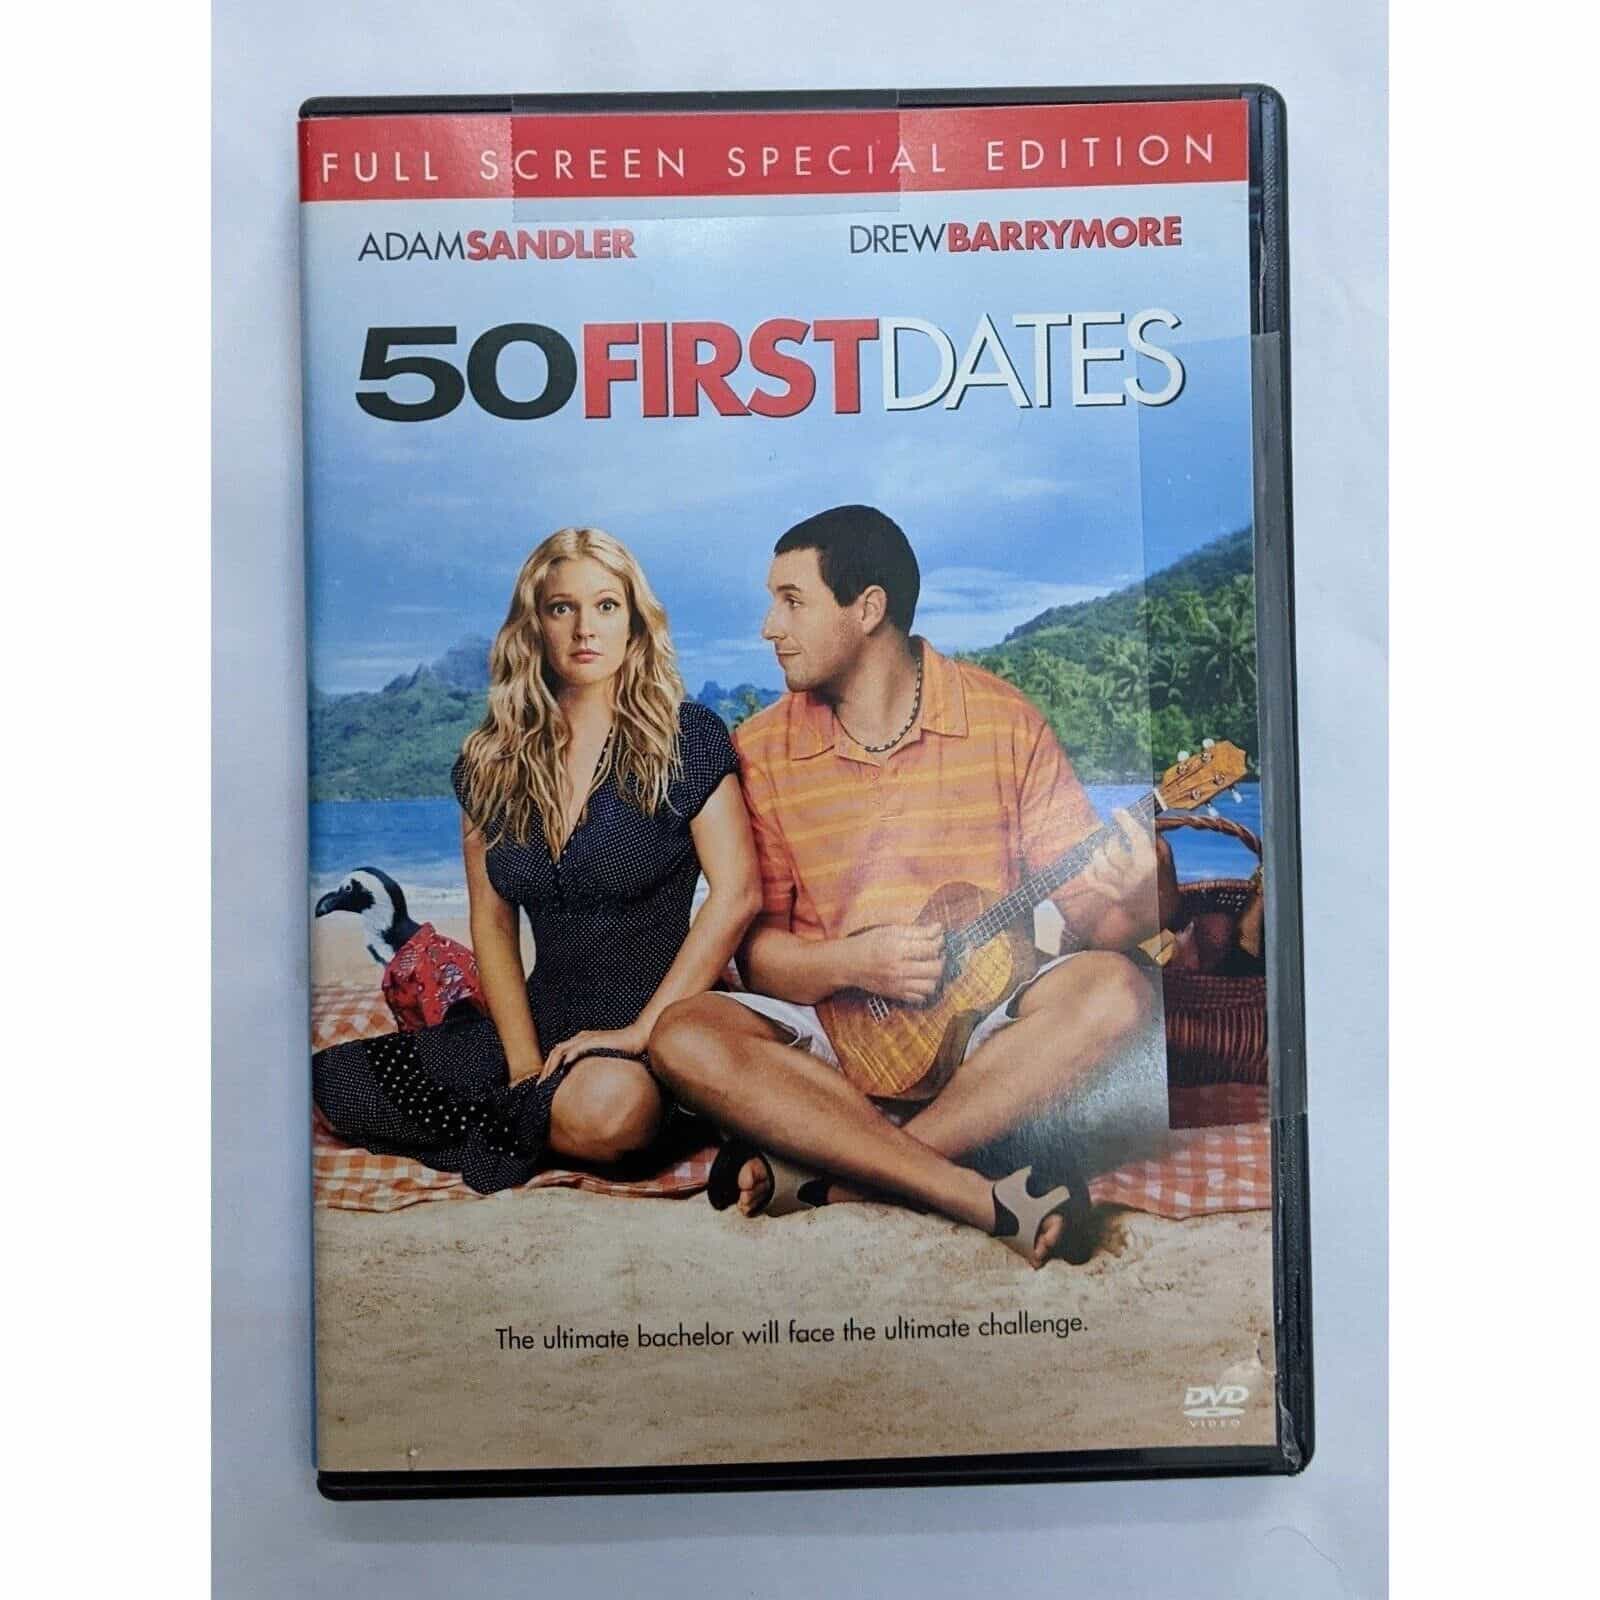 50 First Dates DVD movie – Full Screen Edition